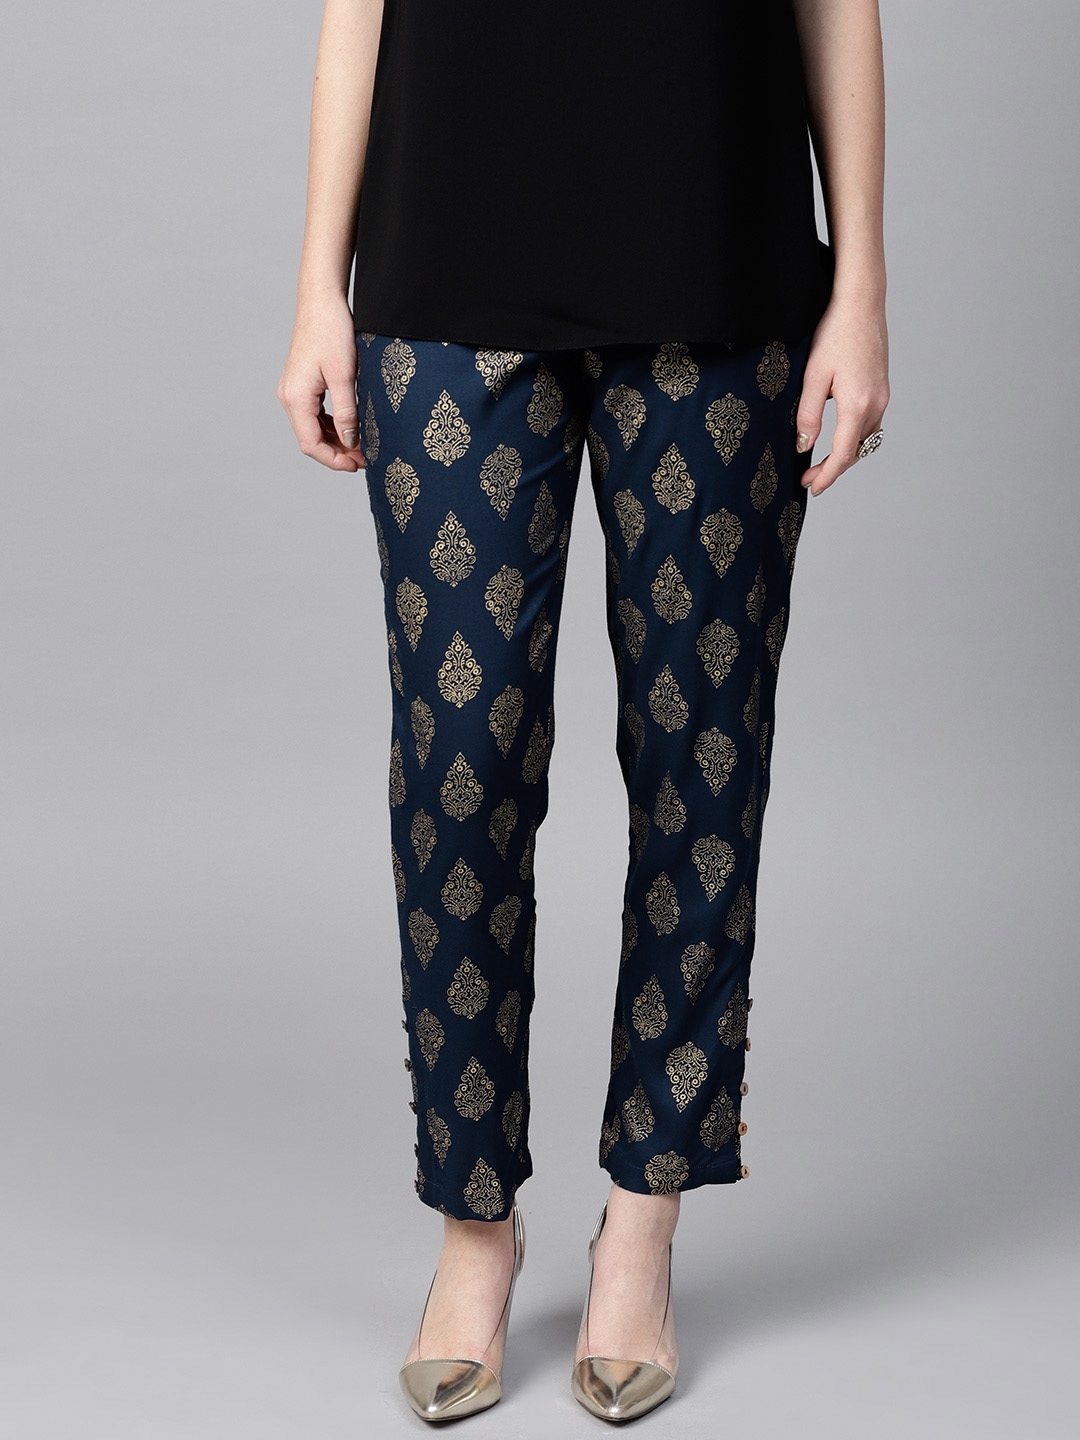 Printed trousers  Pattern  Floral Trousers  ASOS